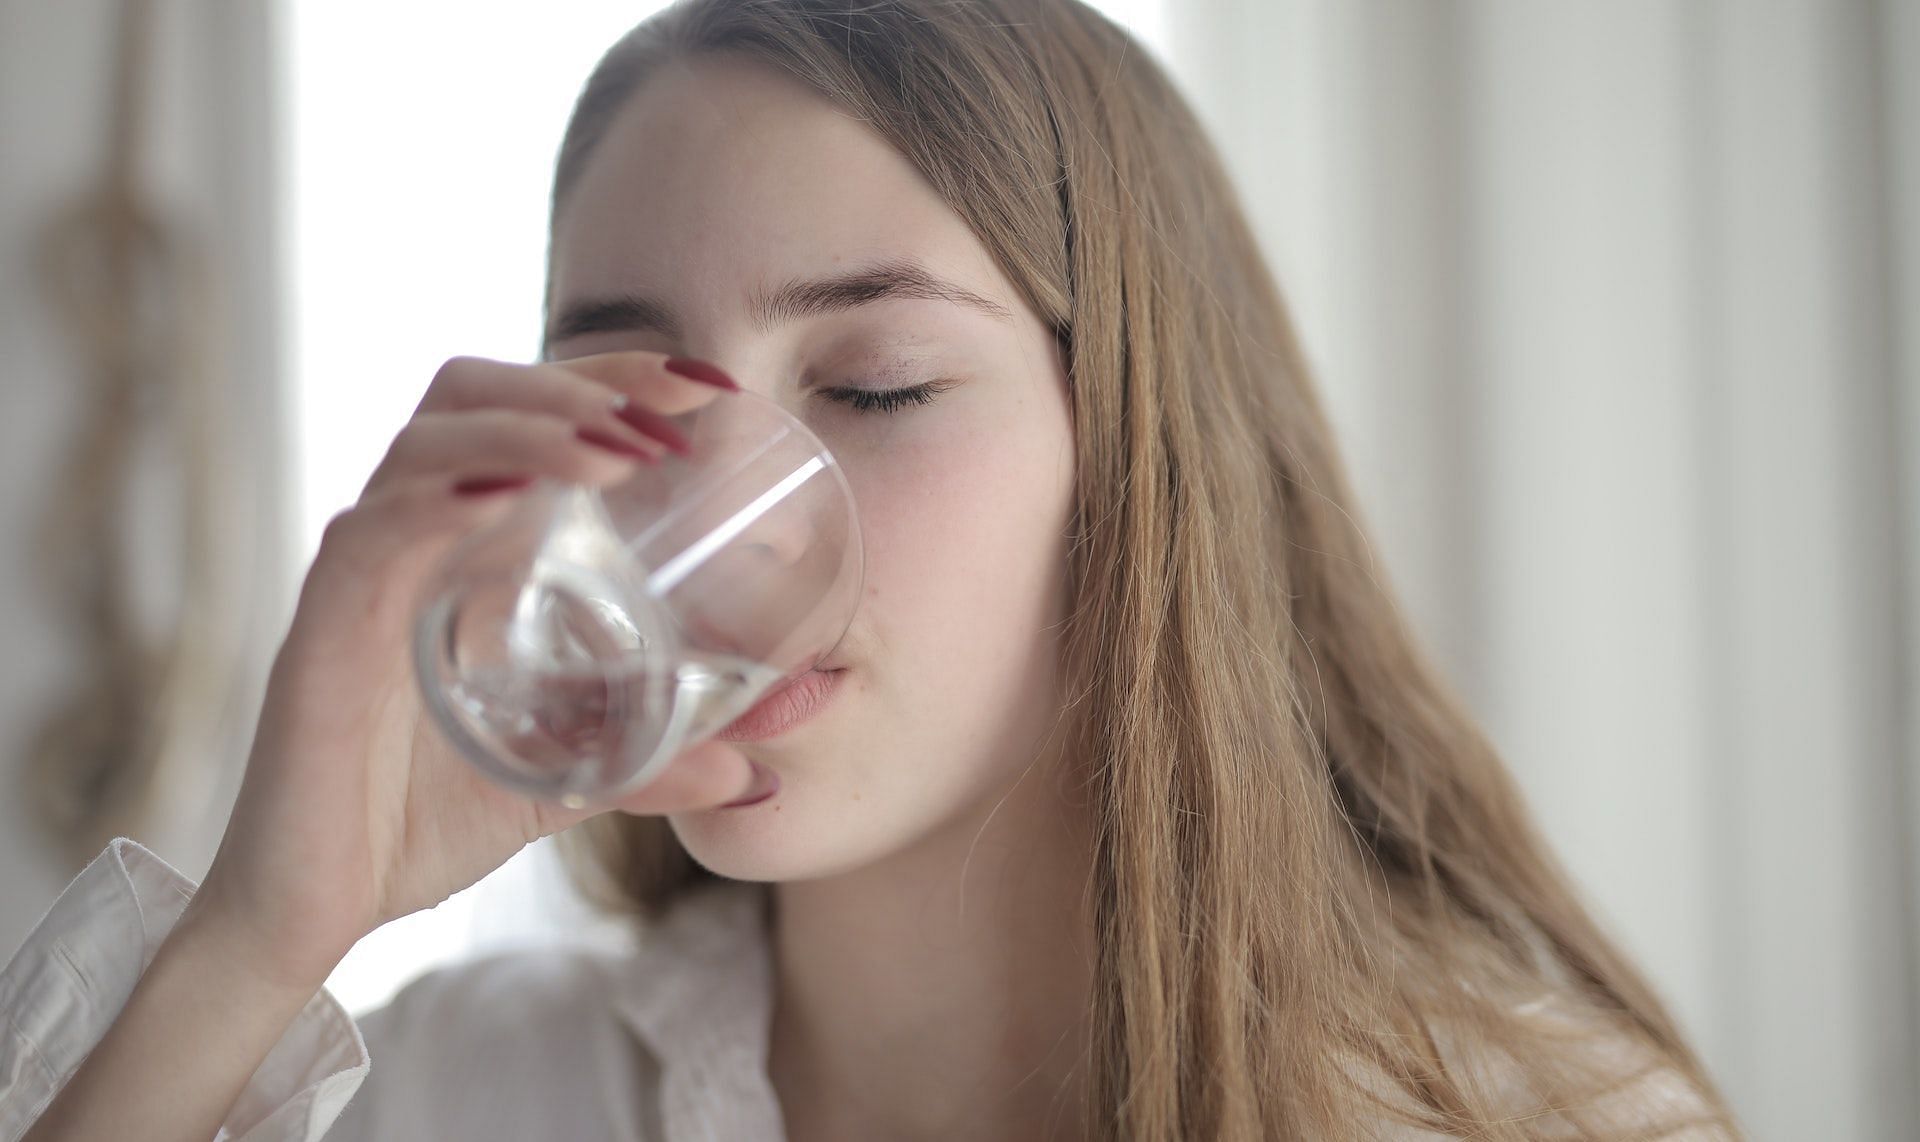 How to speed up digestion? Drink water and improve digestive health. (Photo via Pexels/Andrea Piacquadio)